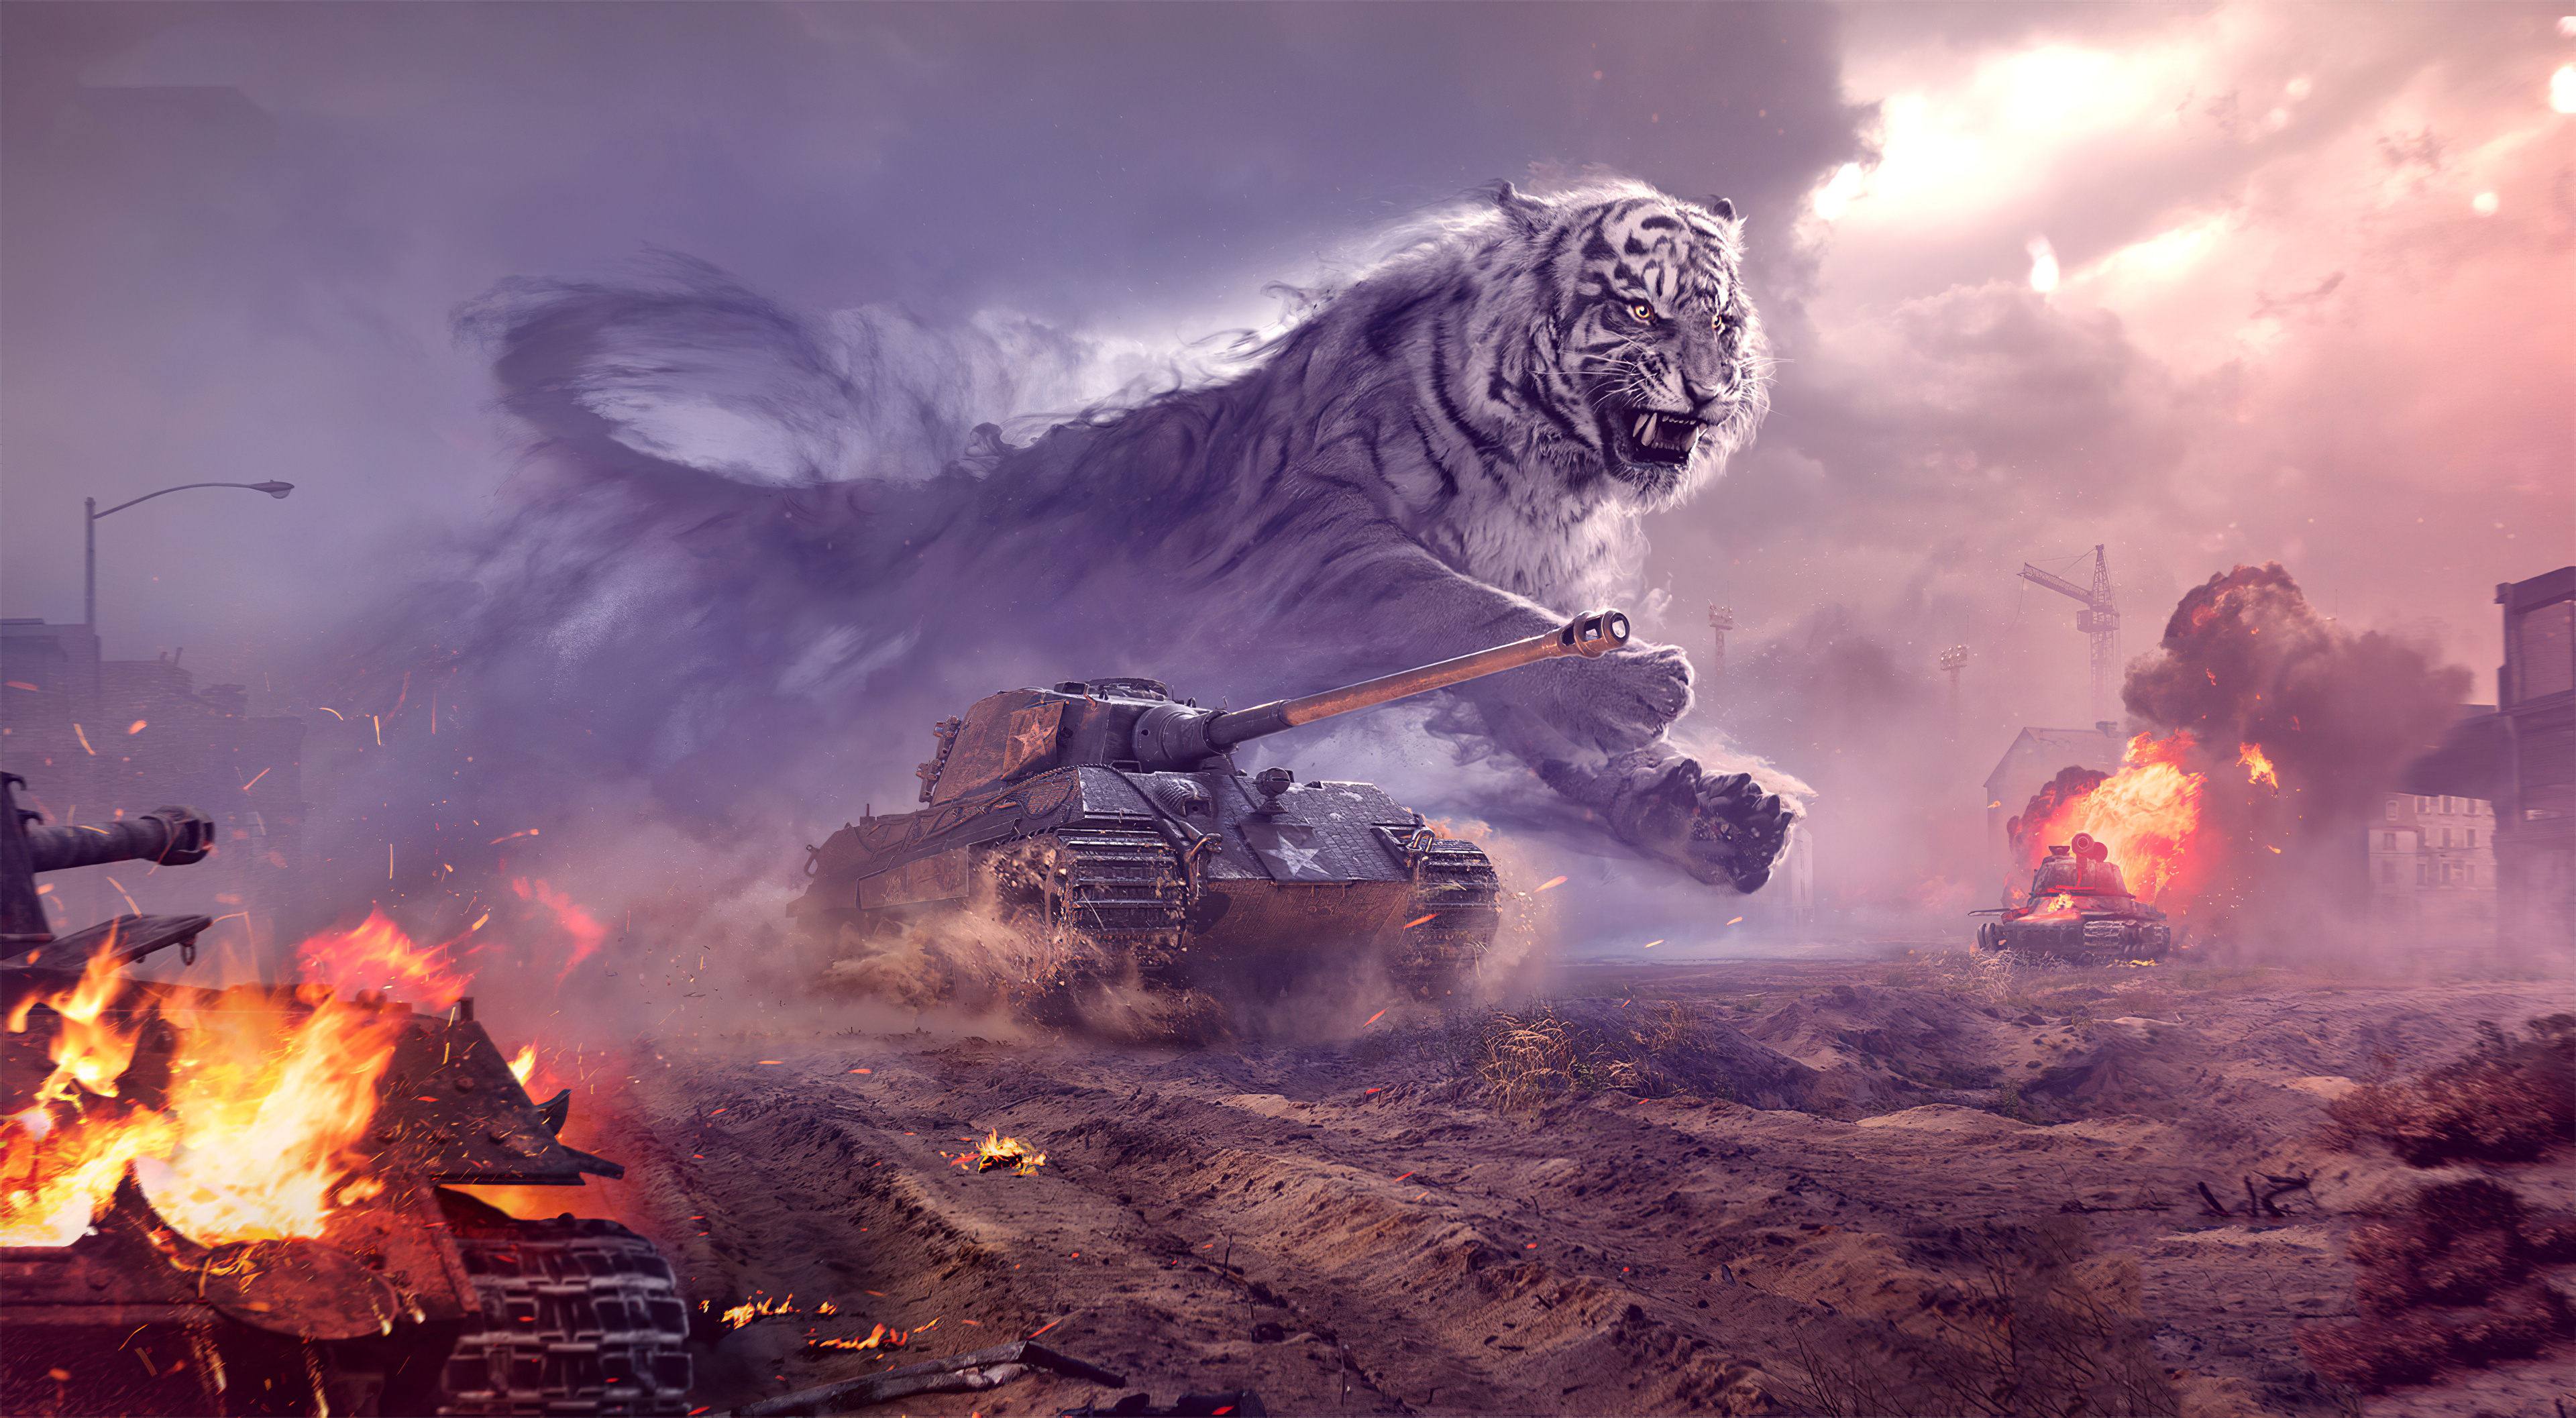 World of Tanks, Epic gaming scenes, 4K wallpapers, High definition images, 3840x2120 HD Desktop